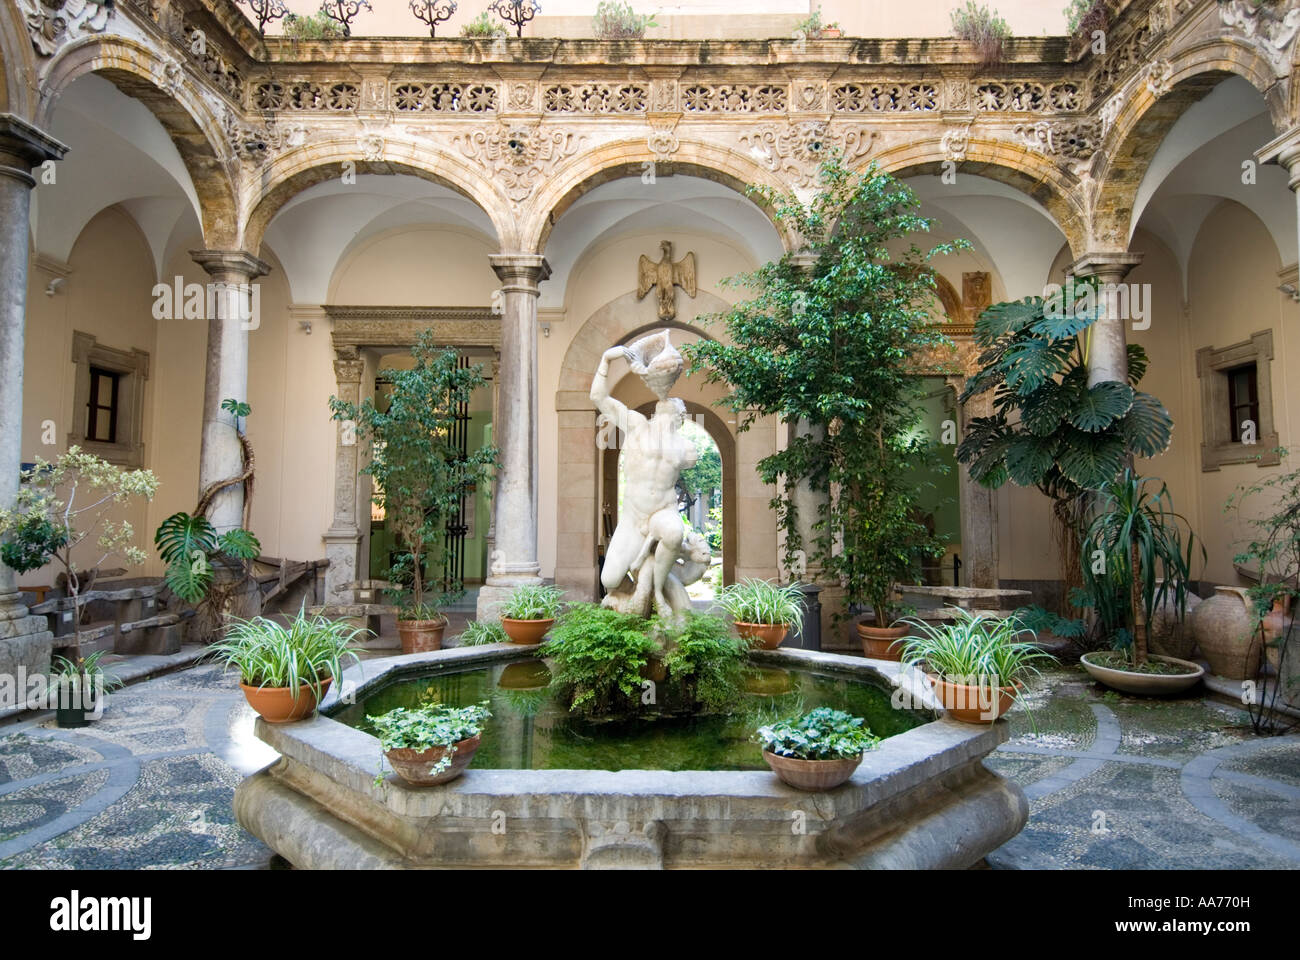 Courtyard of the Museo Archeologico Regionale Palermo Sicily Italy Stock Photo